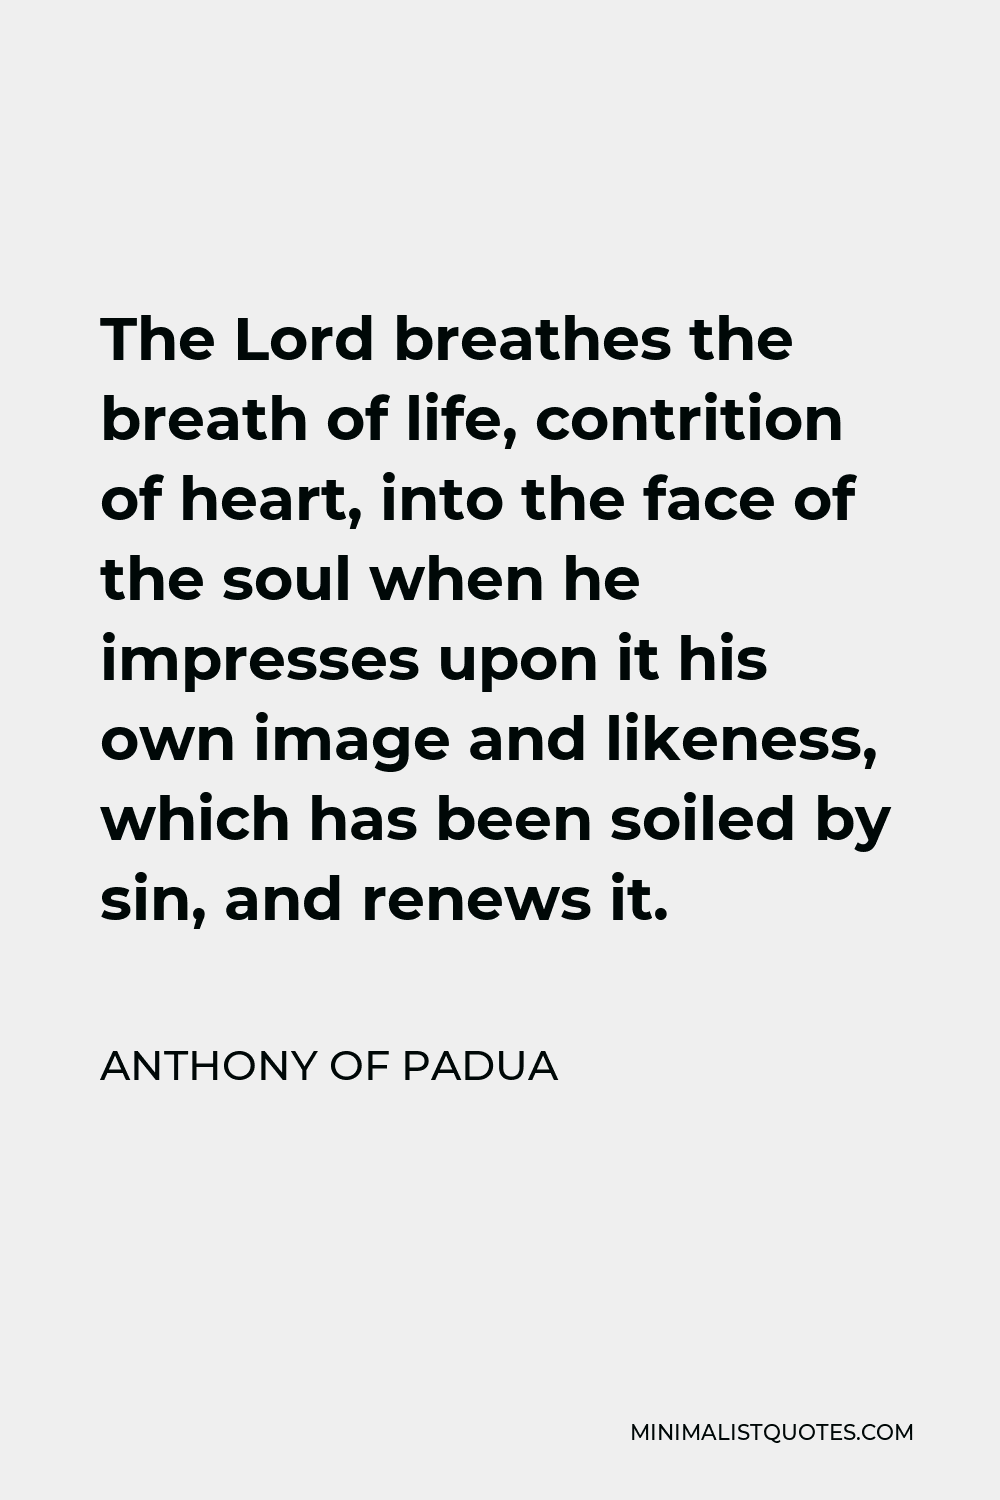 Anthony of Padua Quote - The Lord breathes the breath of life, contrition of heart, into the face of the soul when he impresses upon it his own image and likeness, which has been soiled by sin, and renews it.